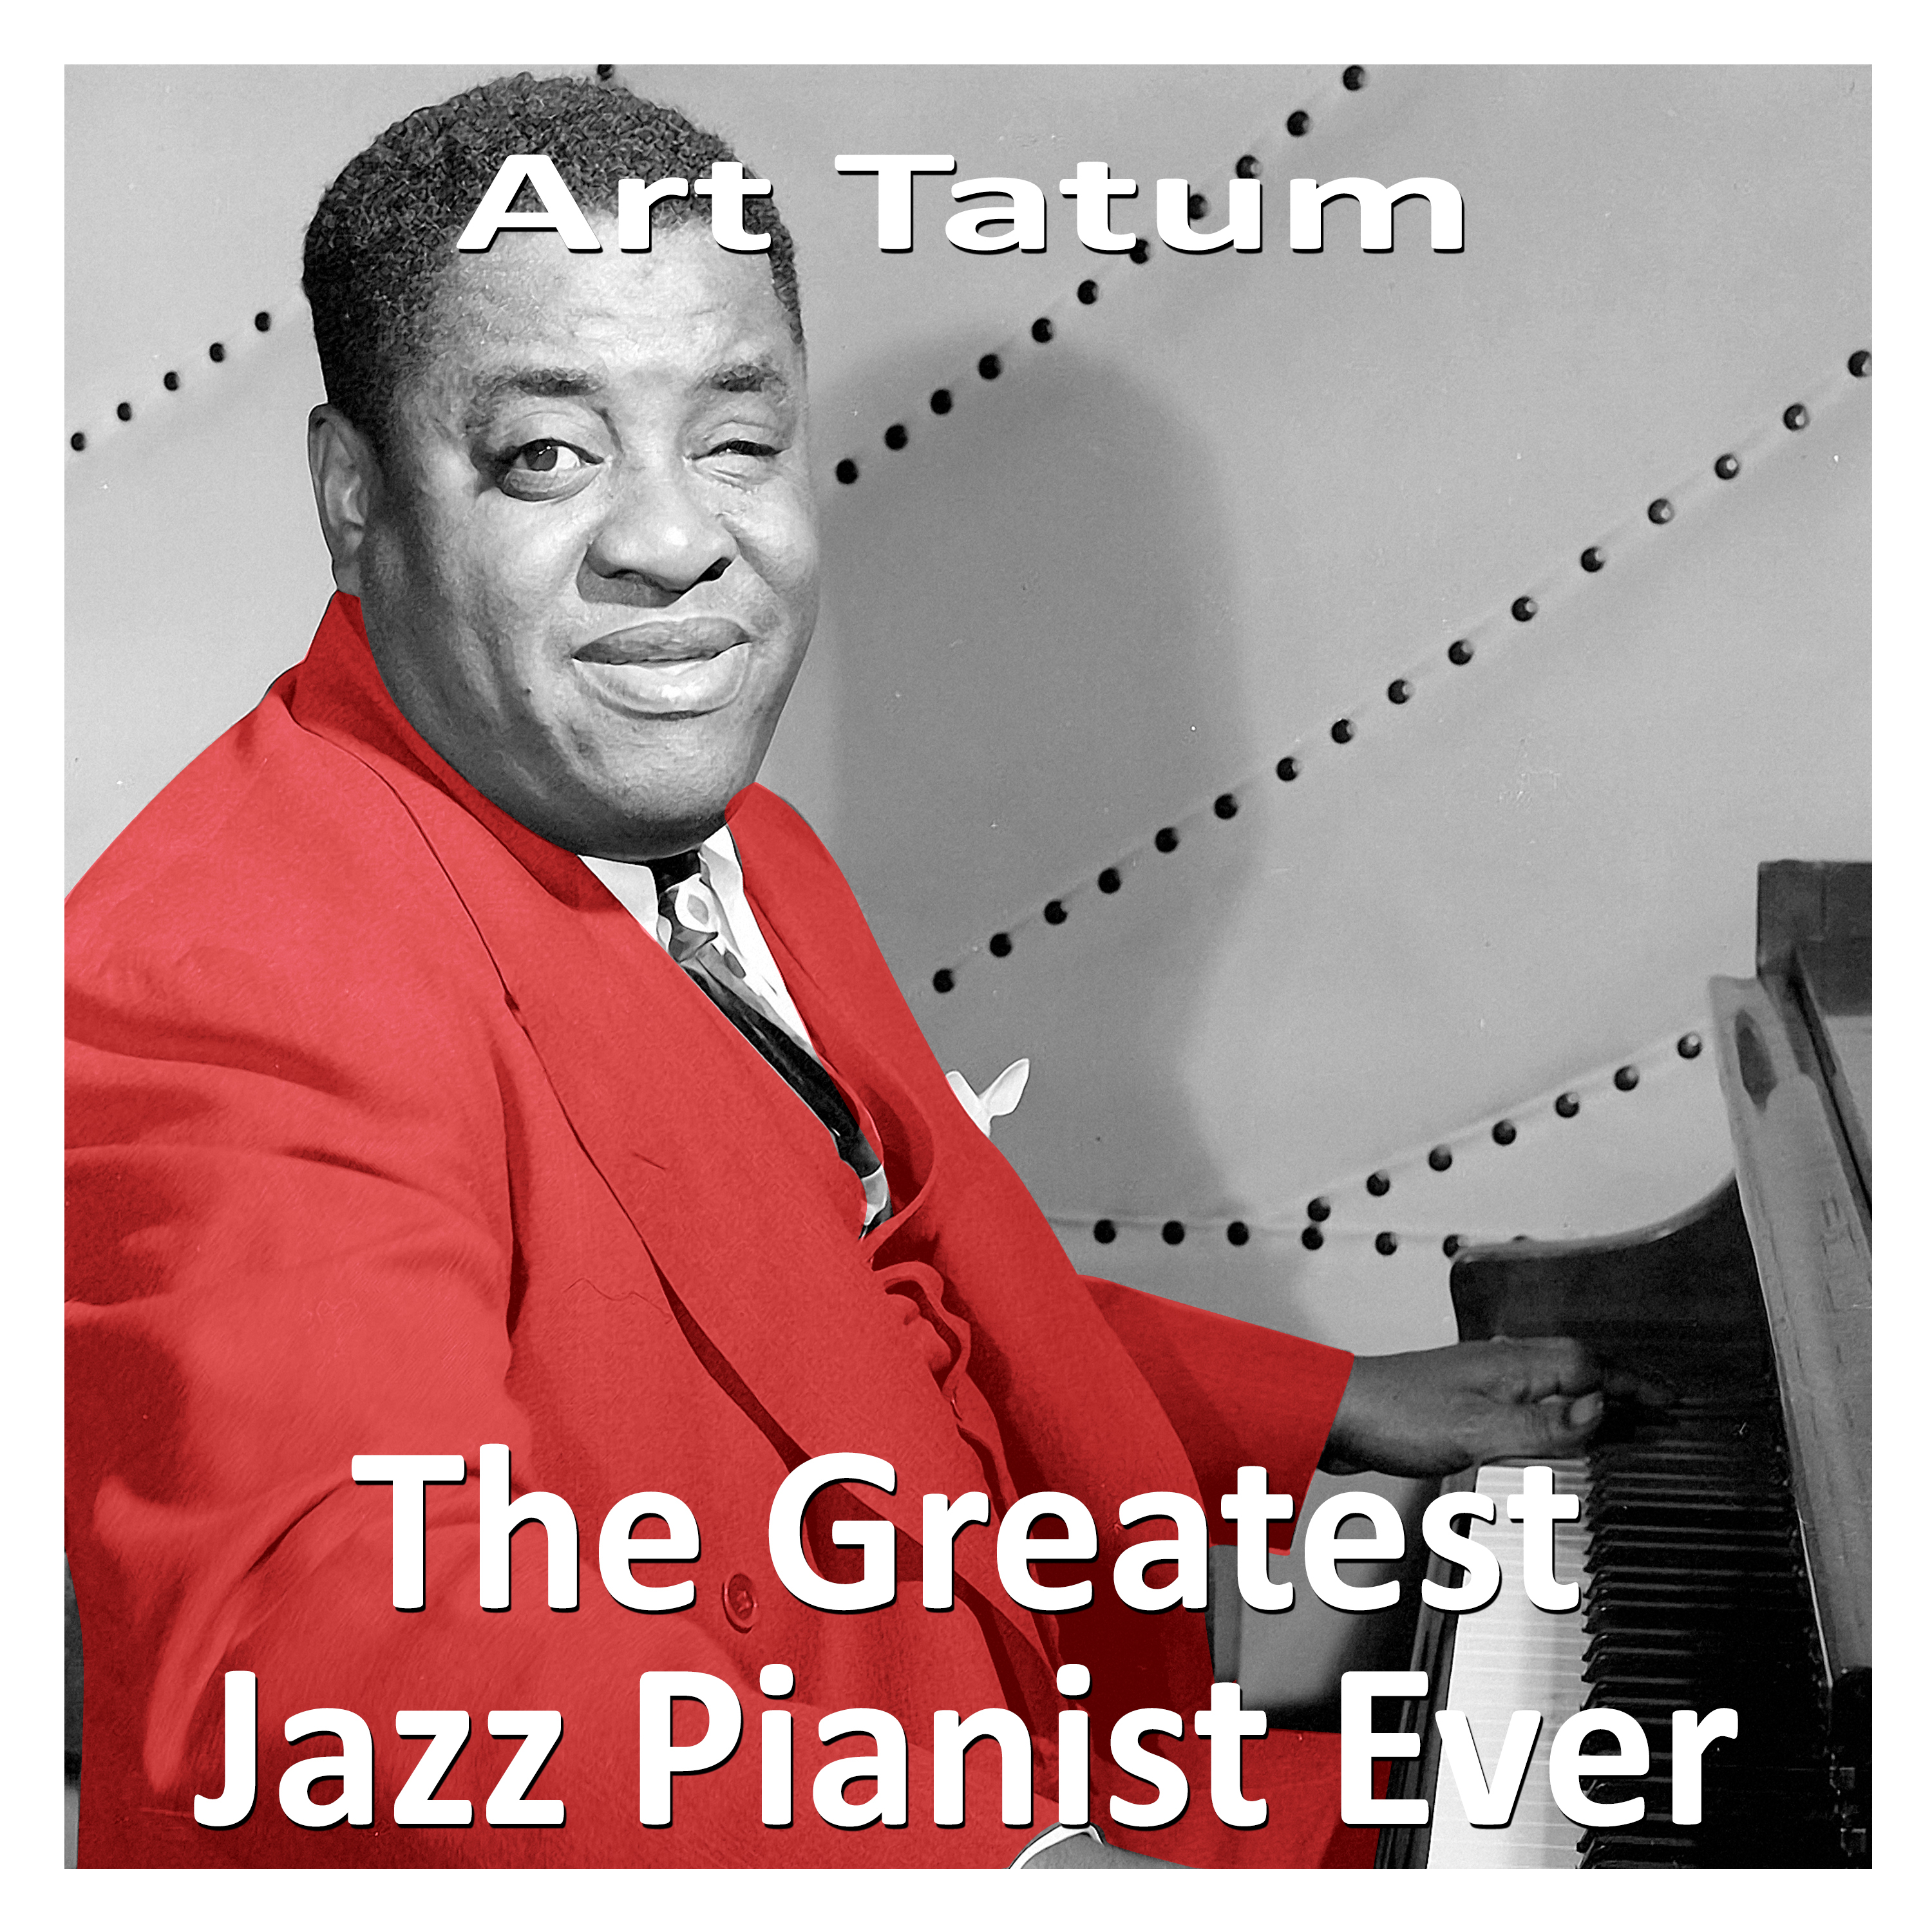 The Greatest Jazz Pianist Ever